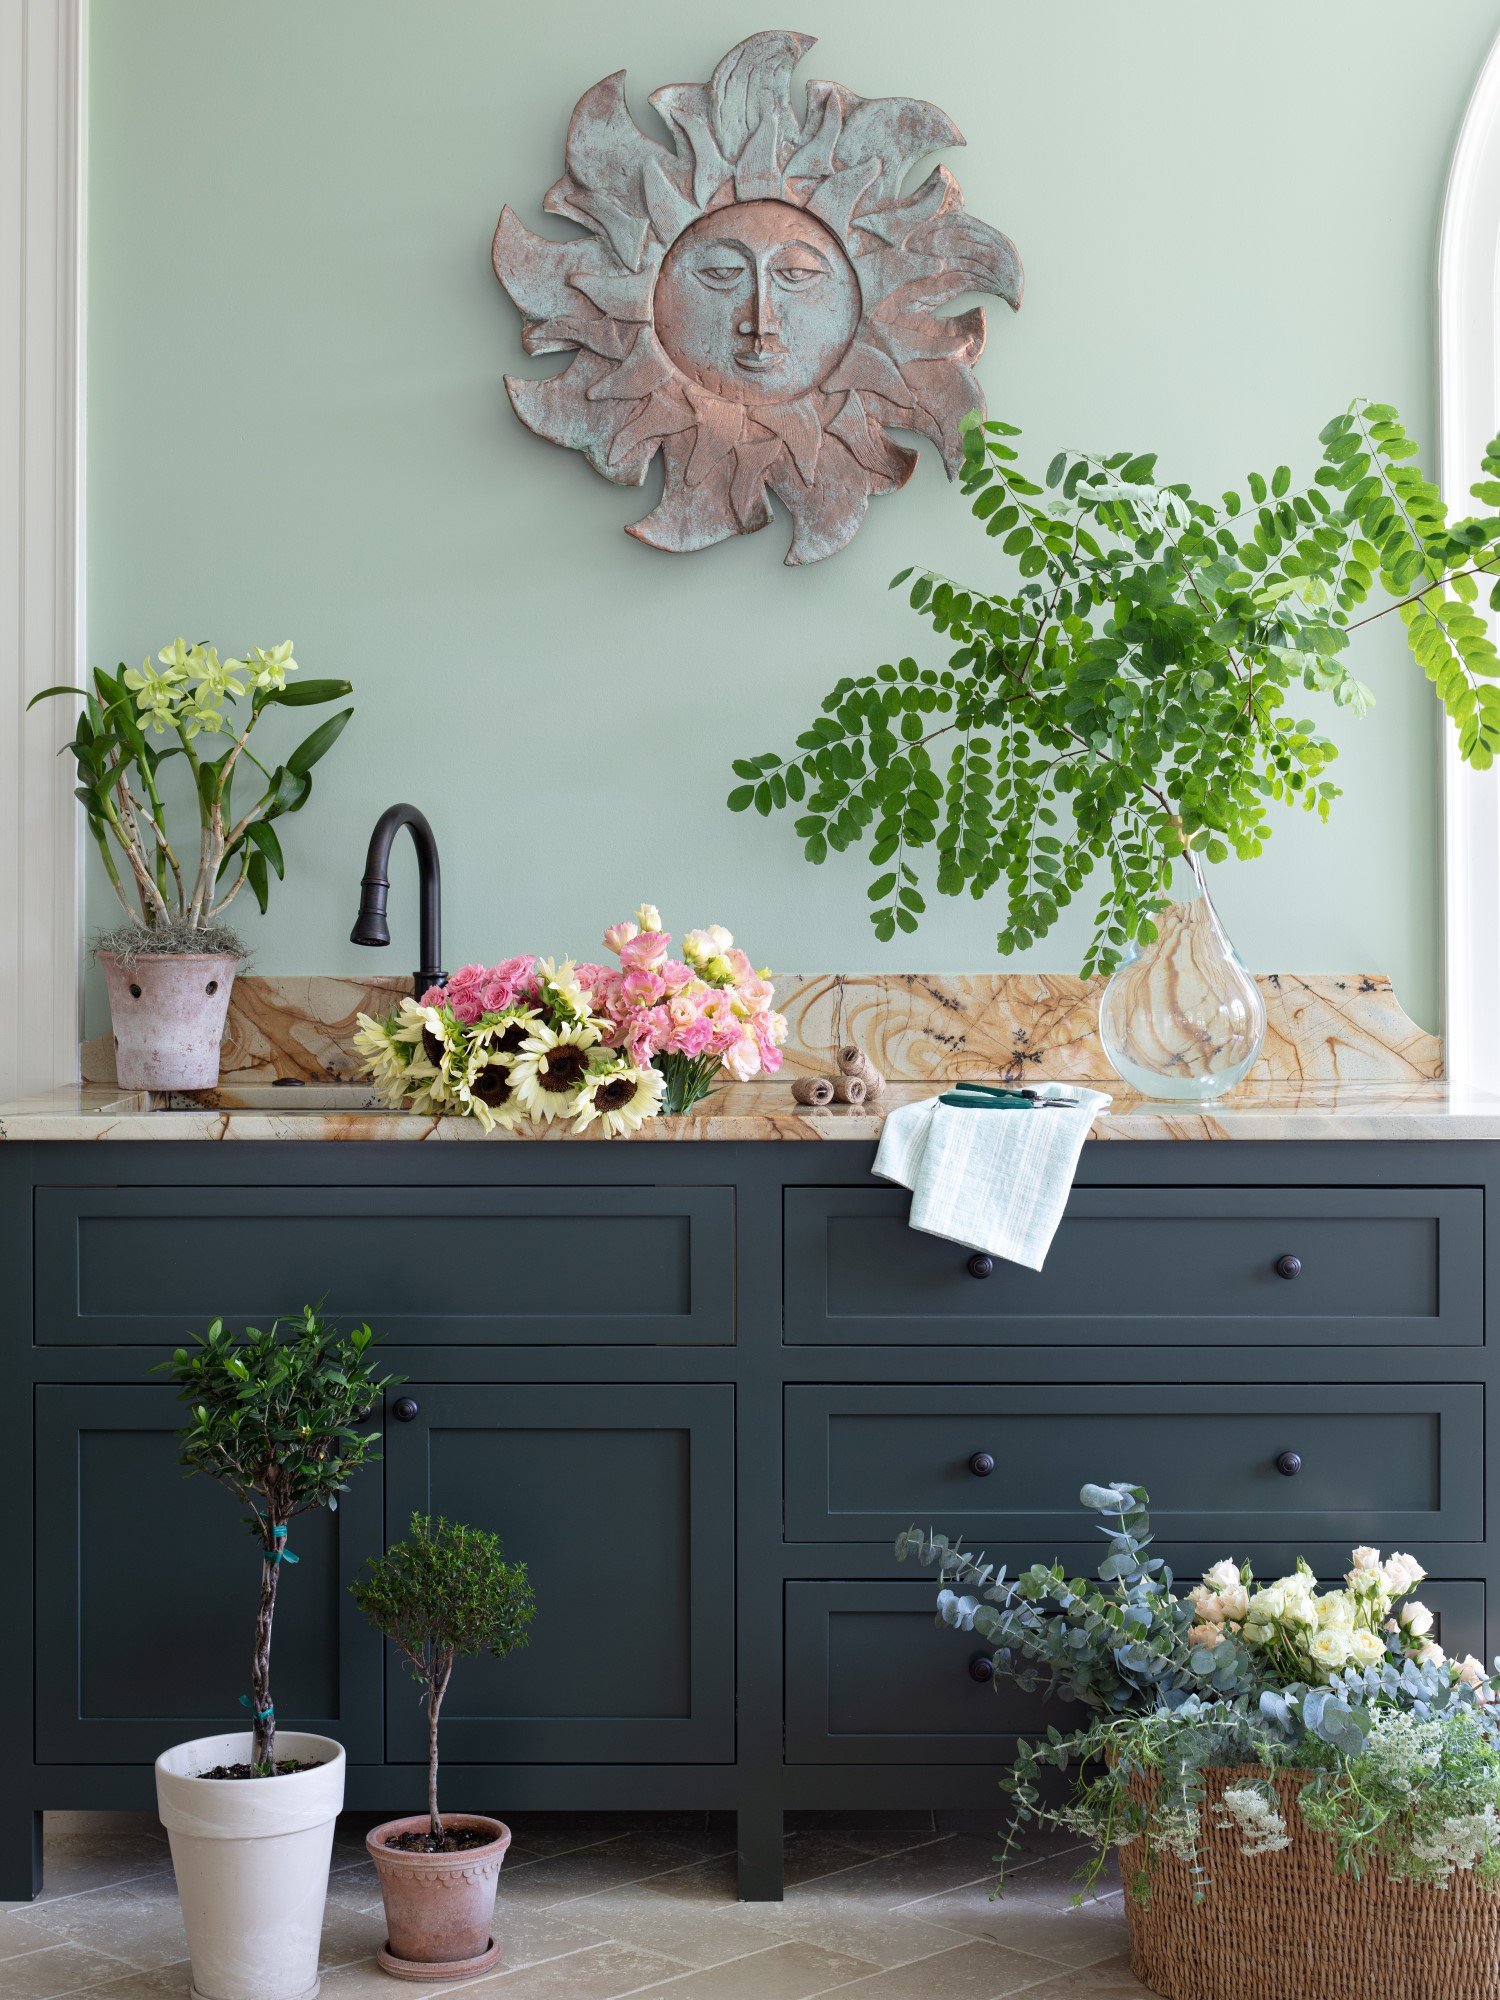  Floral arranging counter with sink 